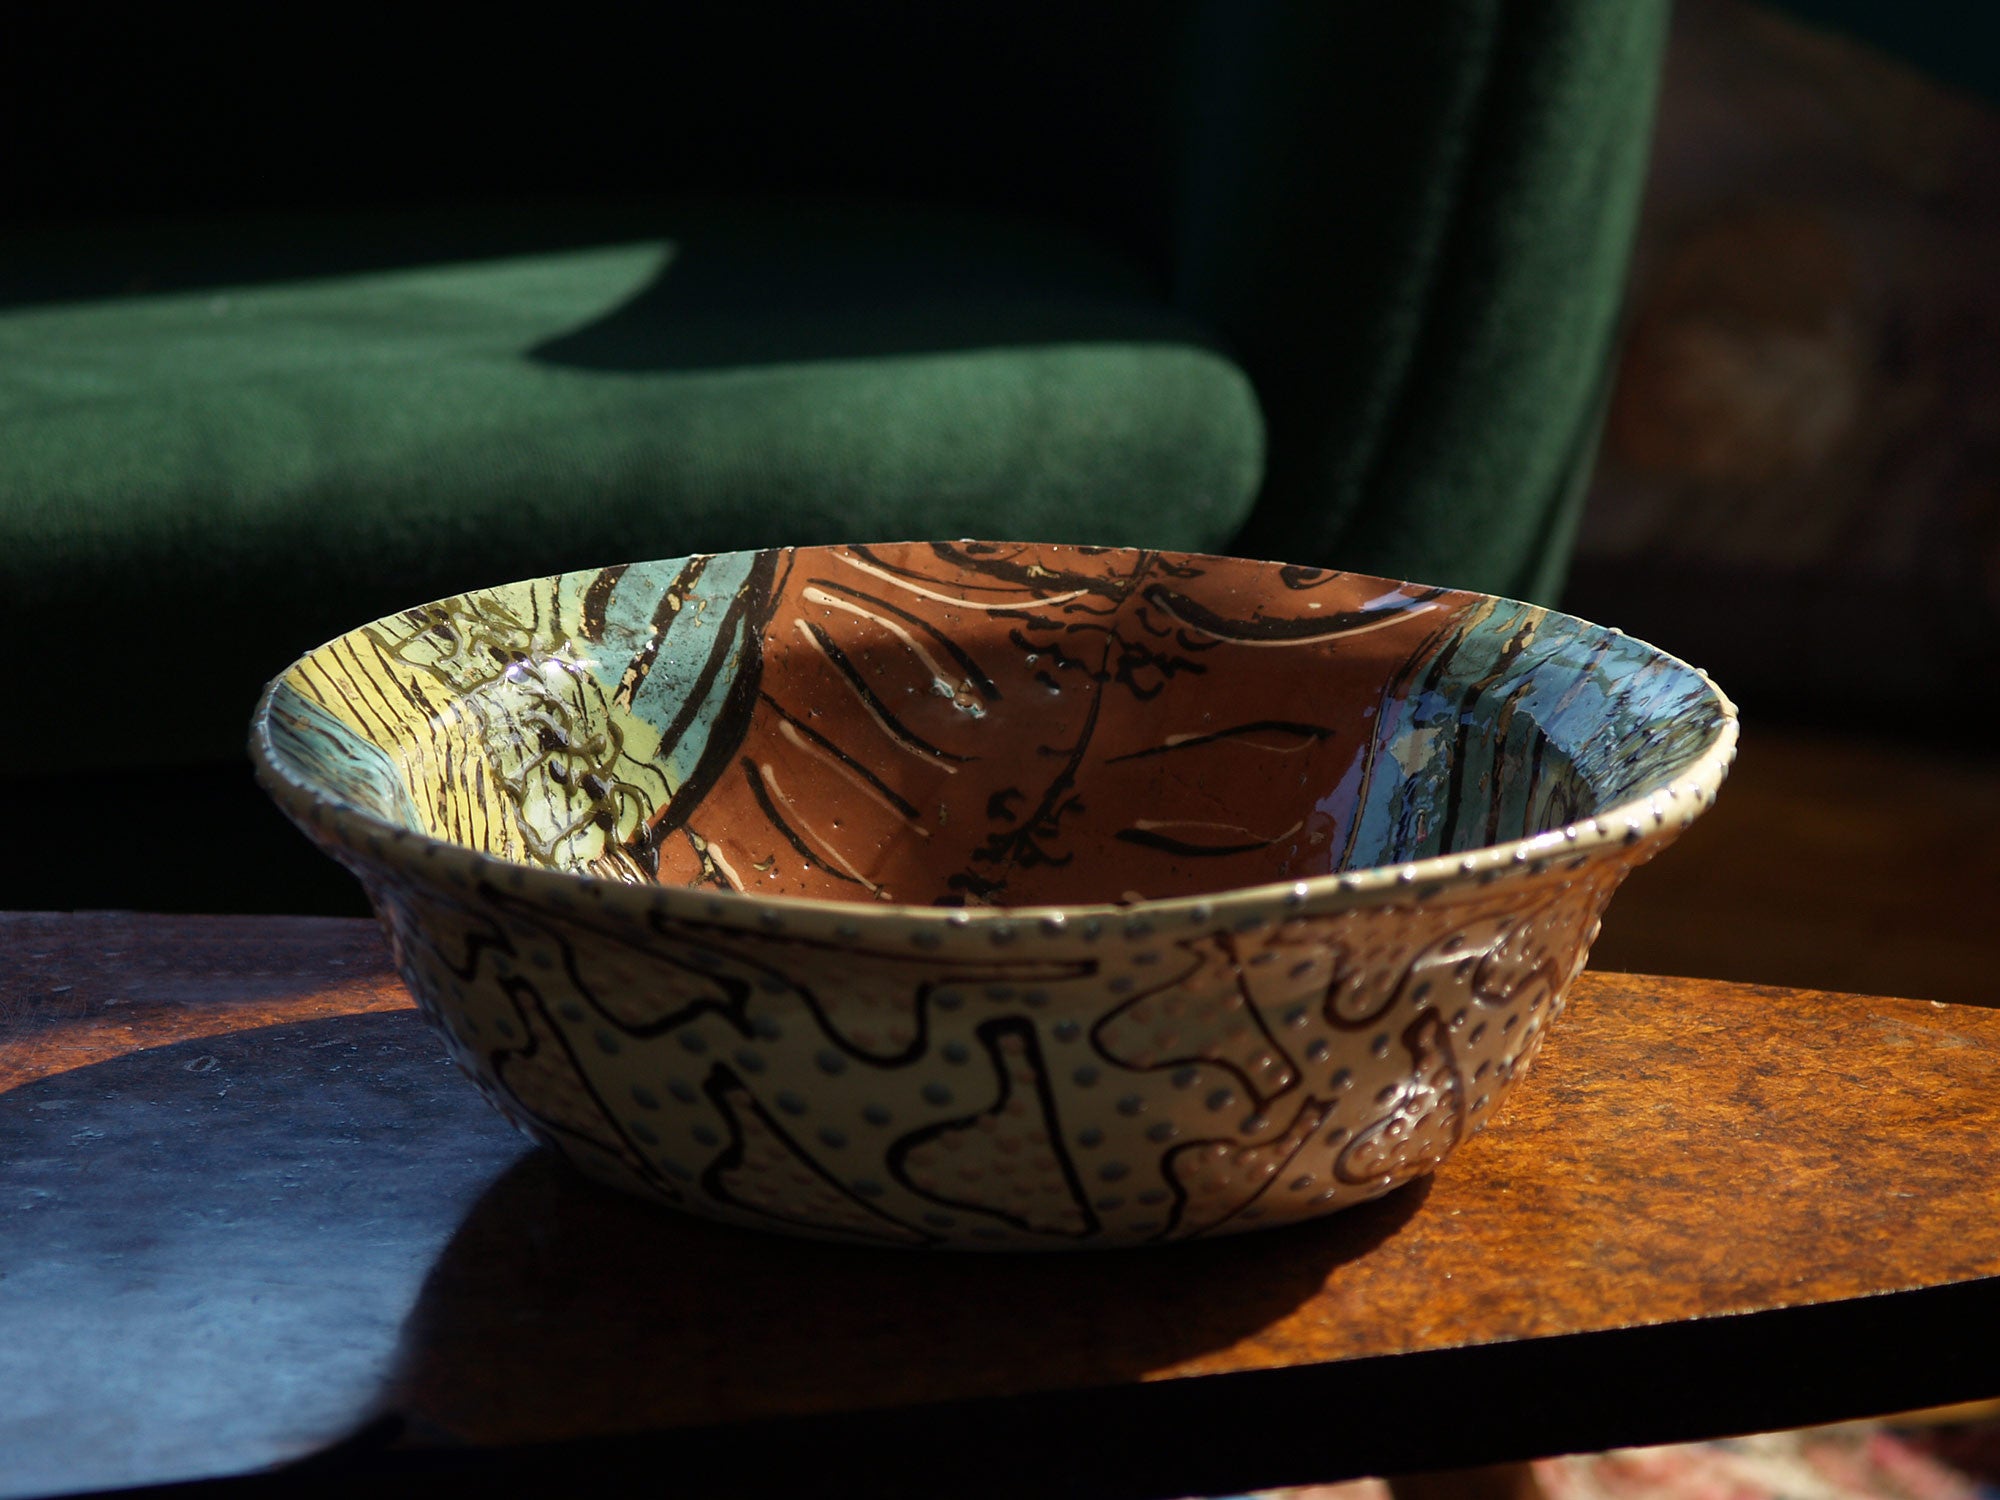 Coupe de Lincoln Kirby-Bell, Angleterre (1991)..Large bowl by Lincoln Kirby-Bell, United&#x2011;Kingdom (1991)